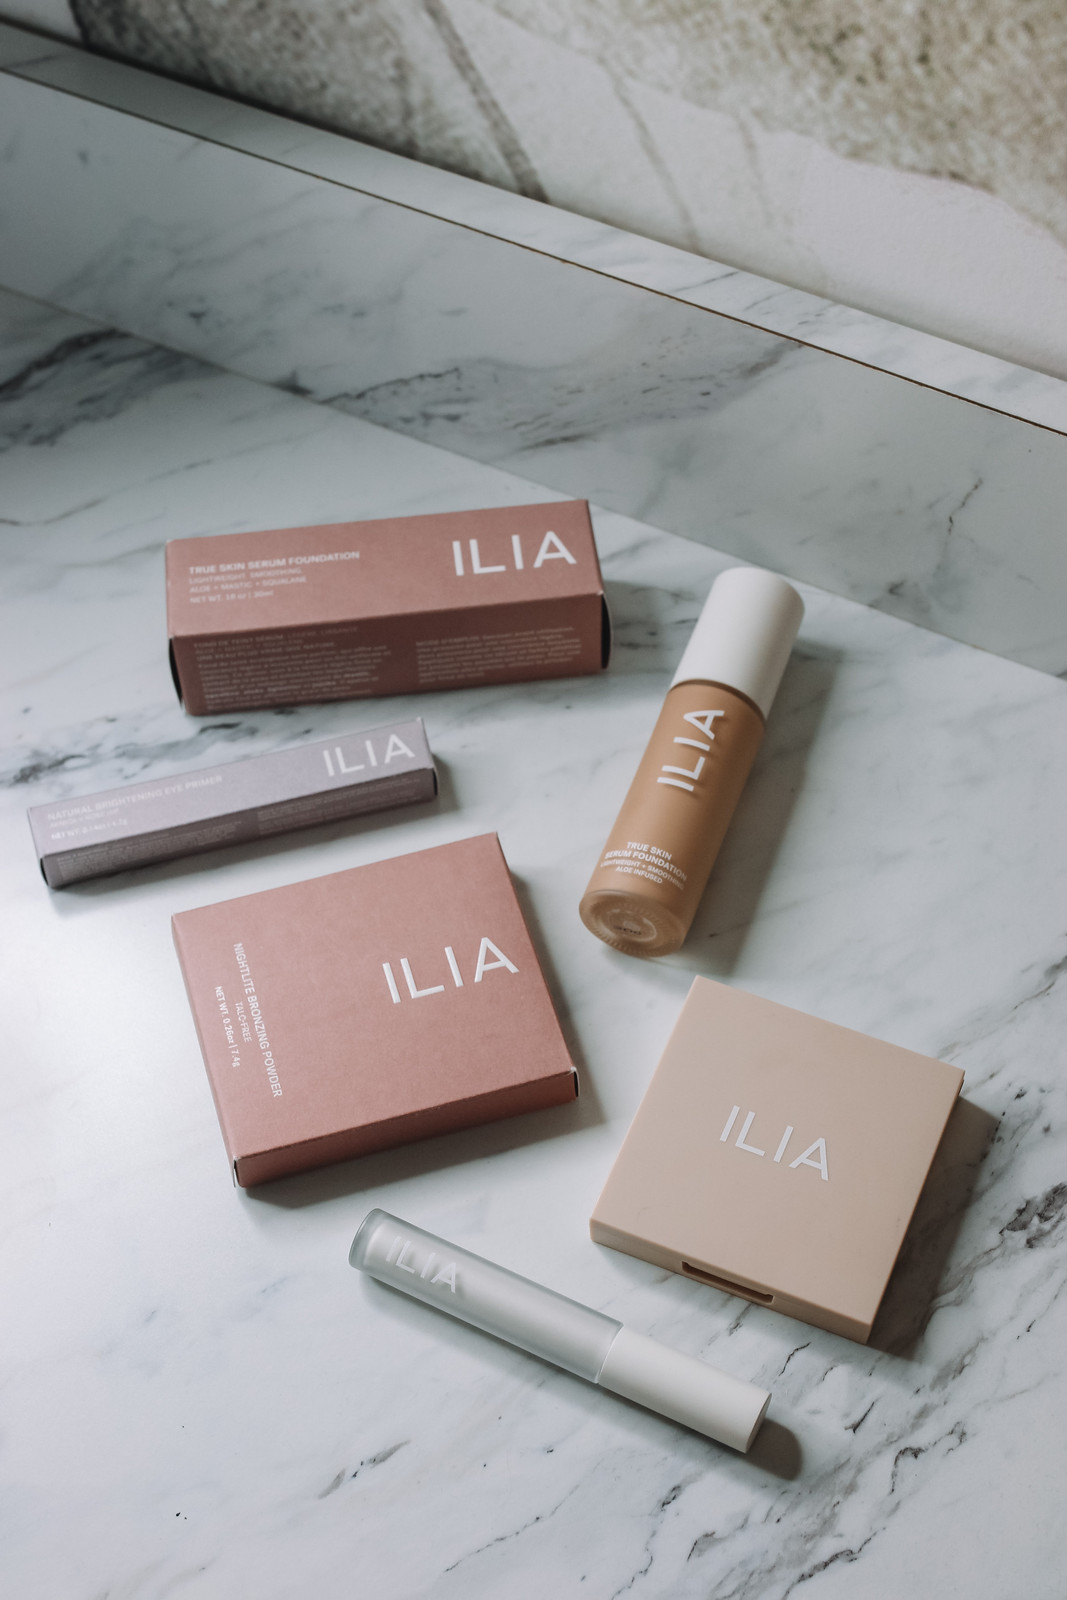 Ilia Beauty First Impressions: Is it Worth it? | Clean Makeup Review | True Skin Serum Foundation | Talc Free Cruelty Free Makeup